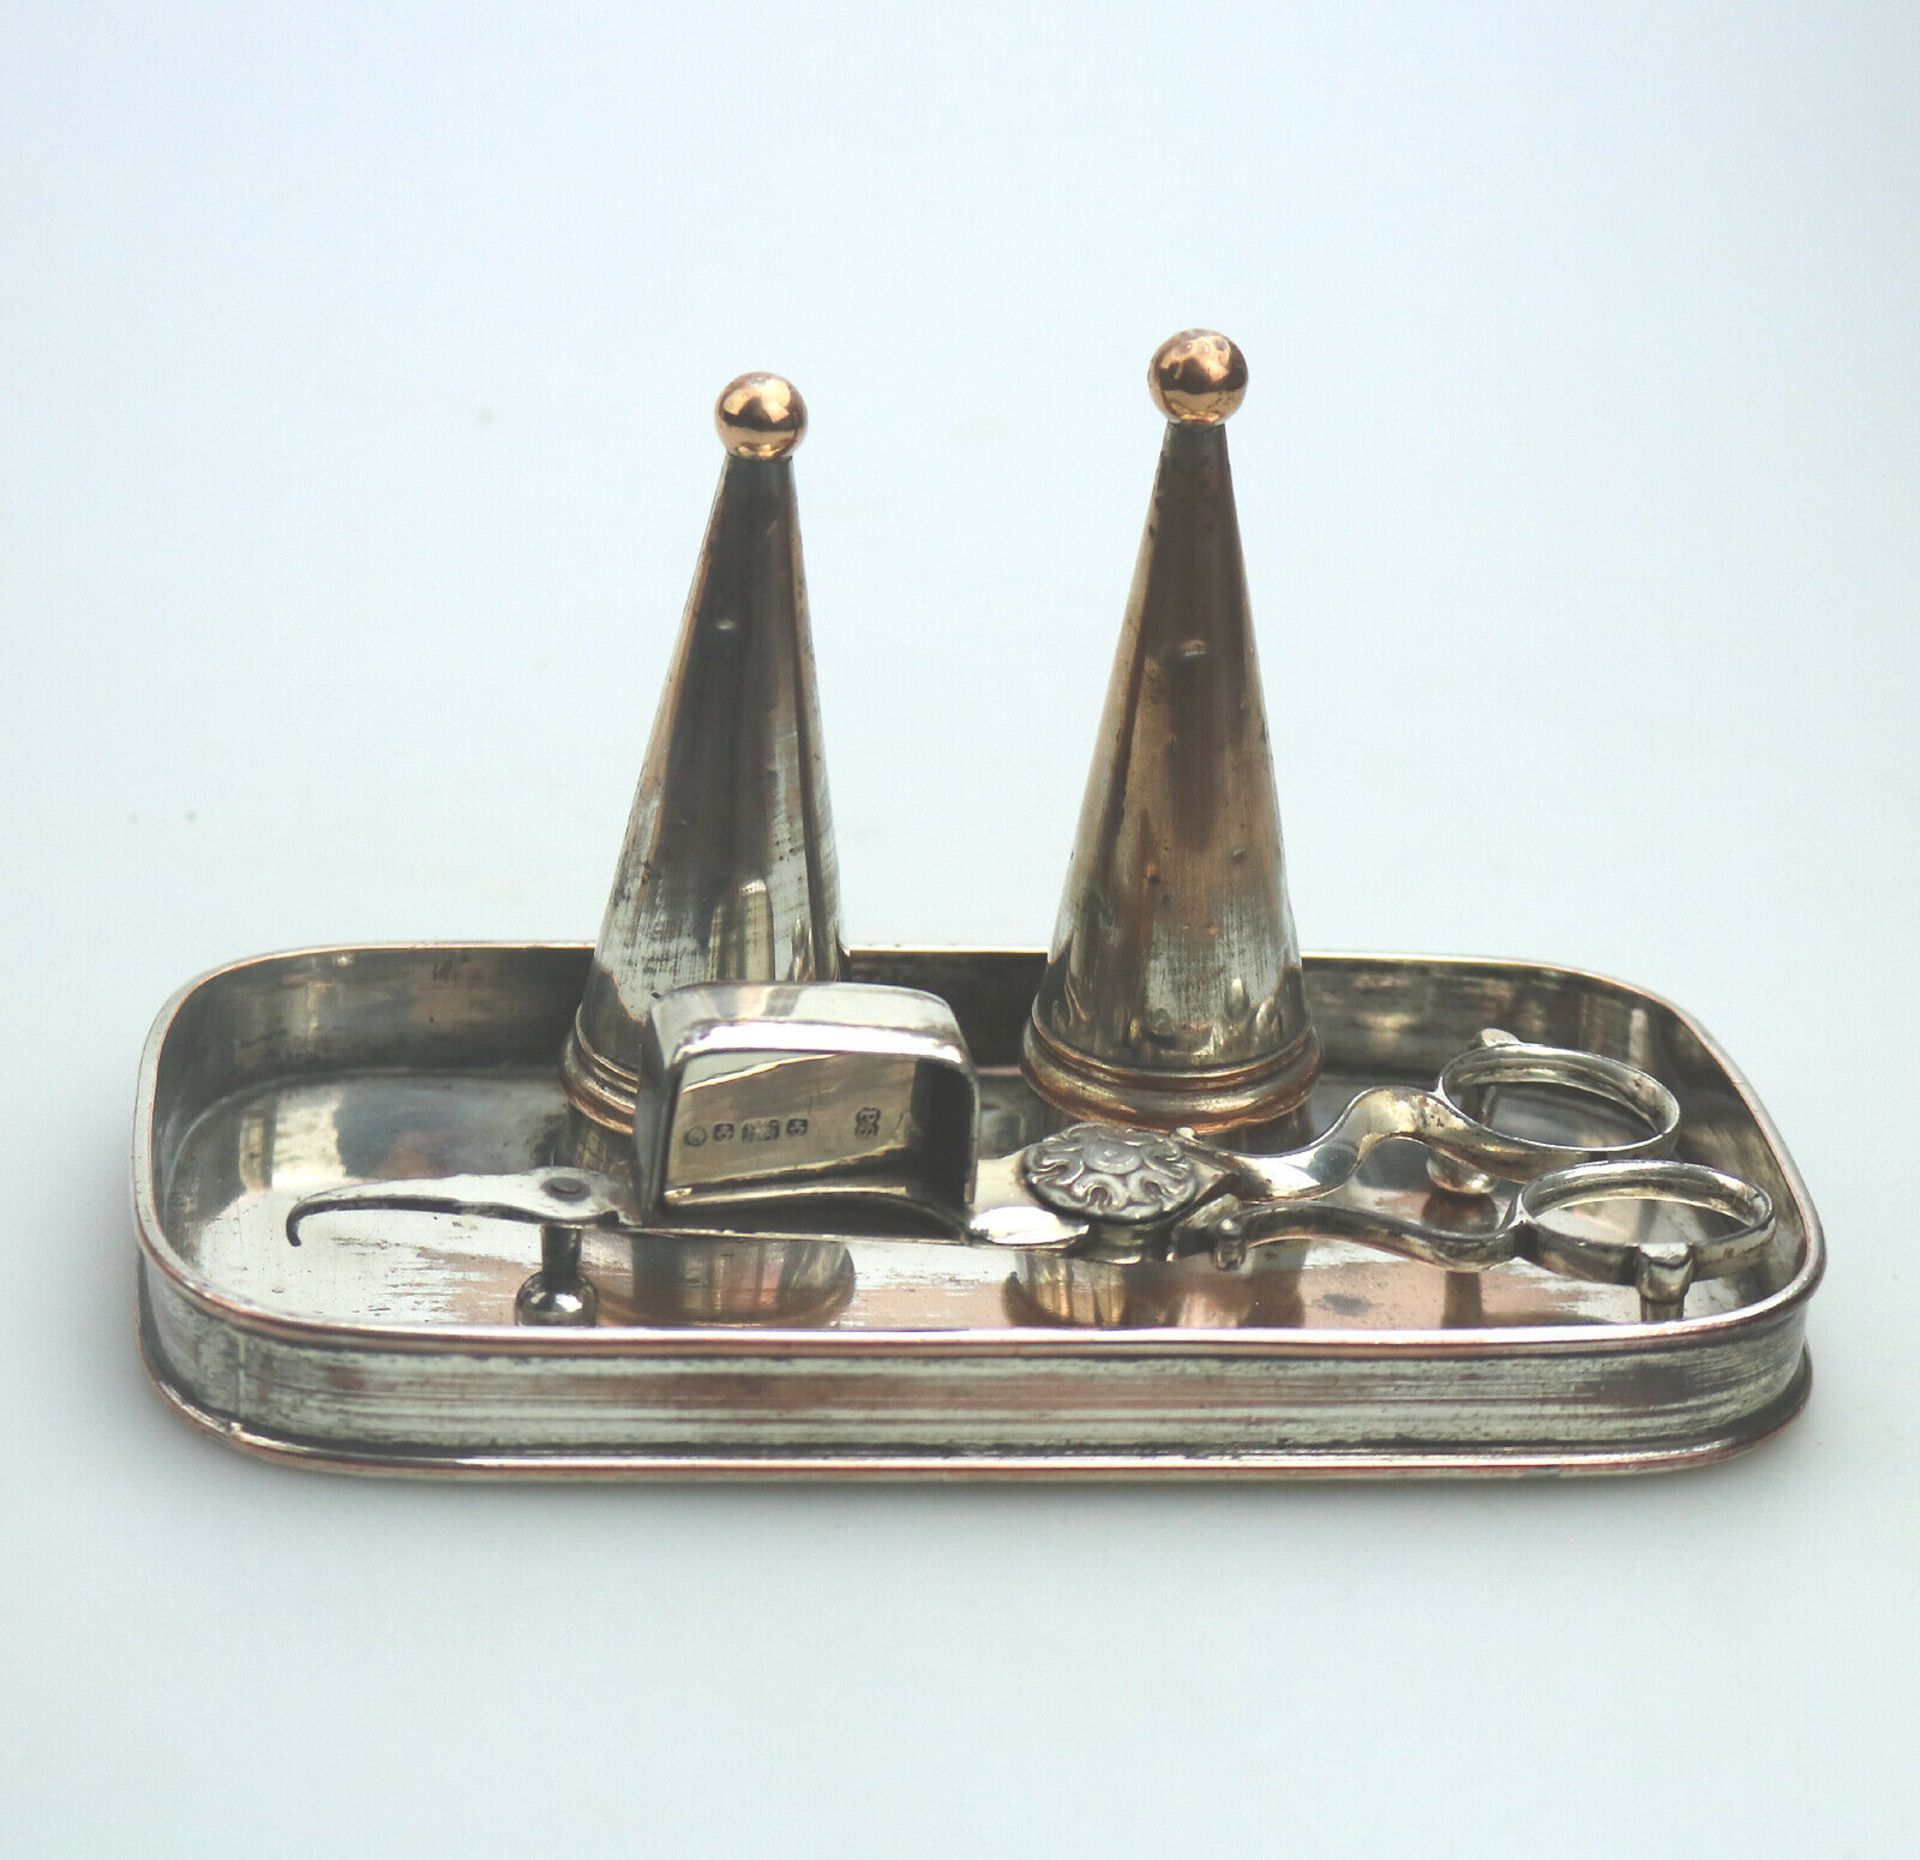 An extremely rare Old Sheffield Plate Georgian double Candle Snuffer Set C.1812